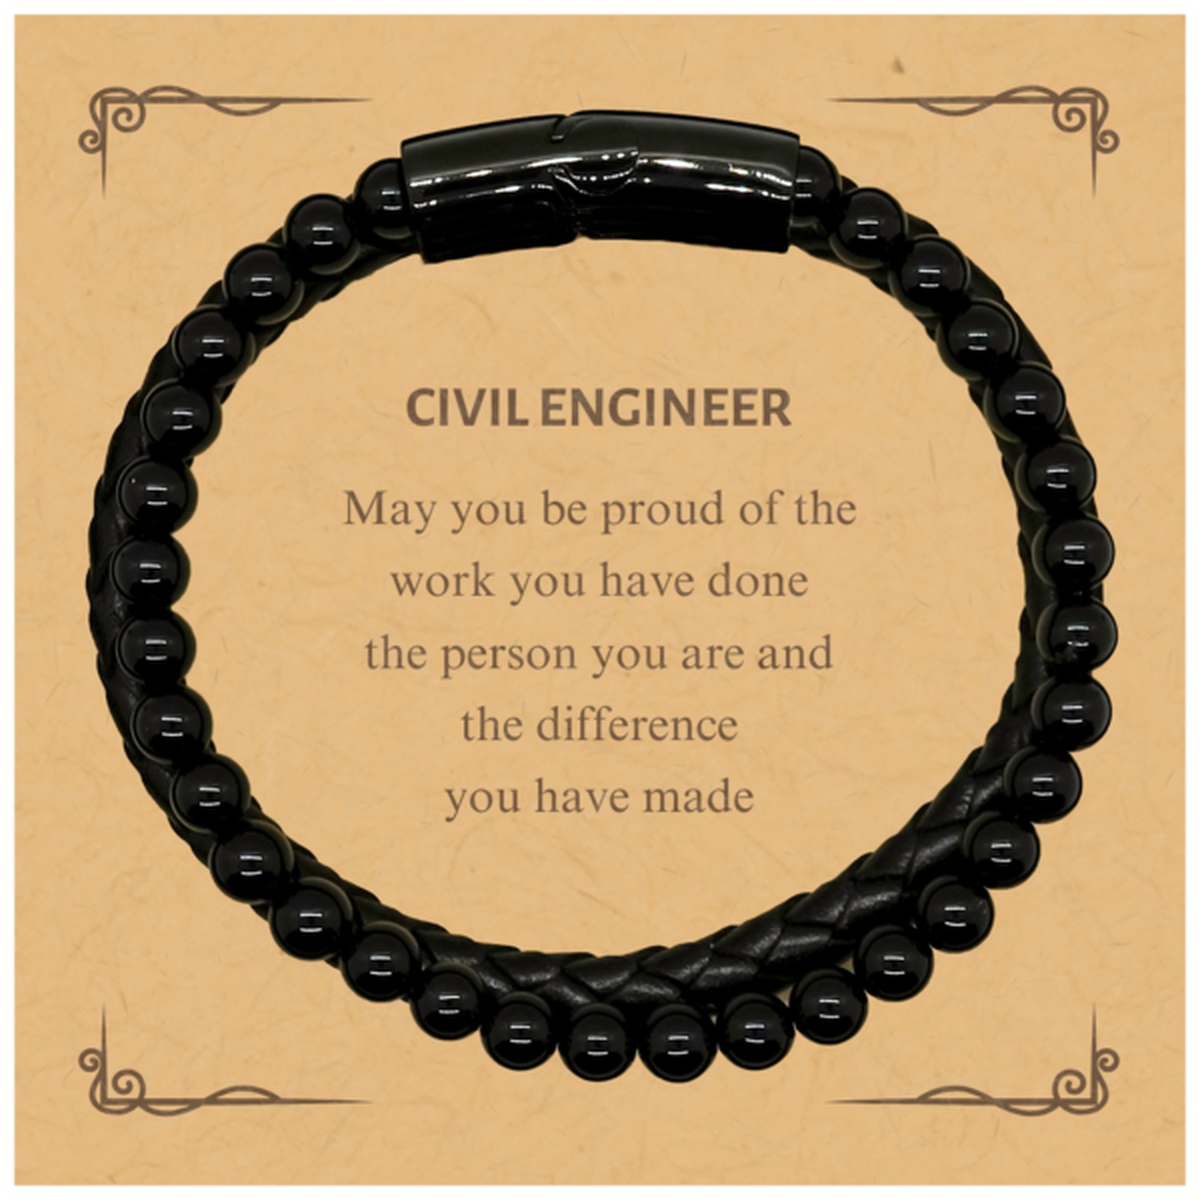 Civil Engineer May you be proud of the work you have done, Retirement Civil Engineer Stone Leather Bracelets for Colleague Appreciation Gifts Amazing for Civil Engineer